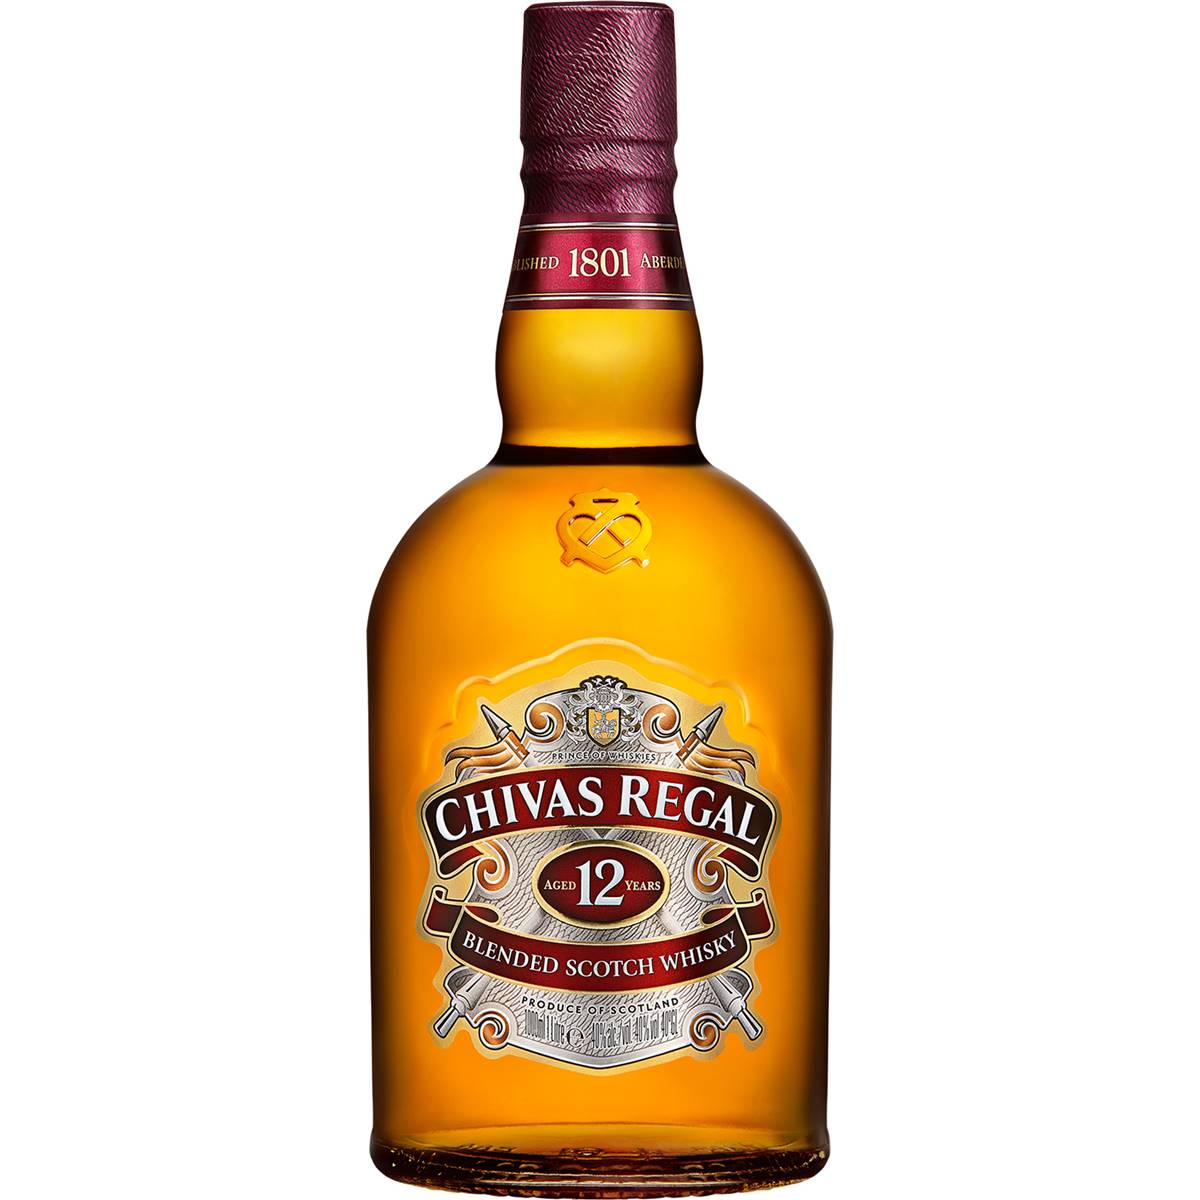 Calories in Chivas Regal Scotch Whisky 12 Years Old